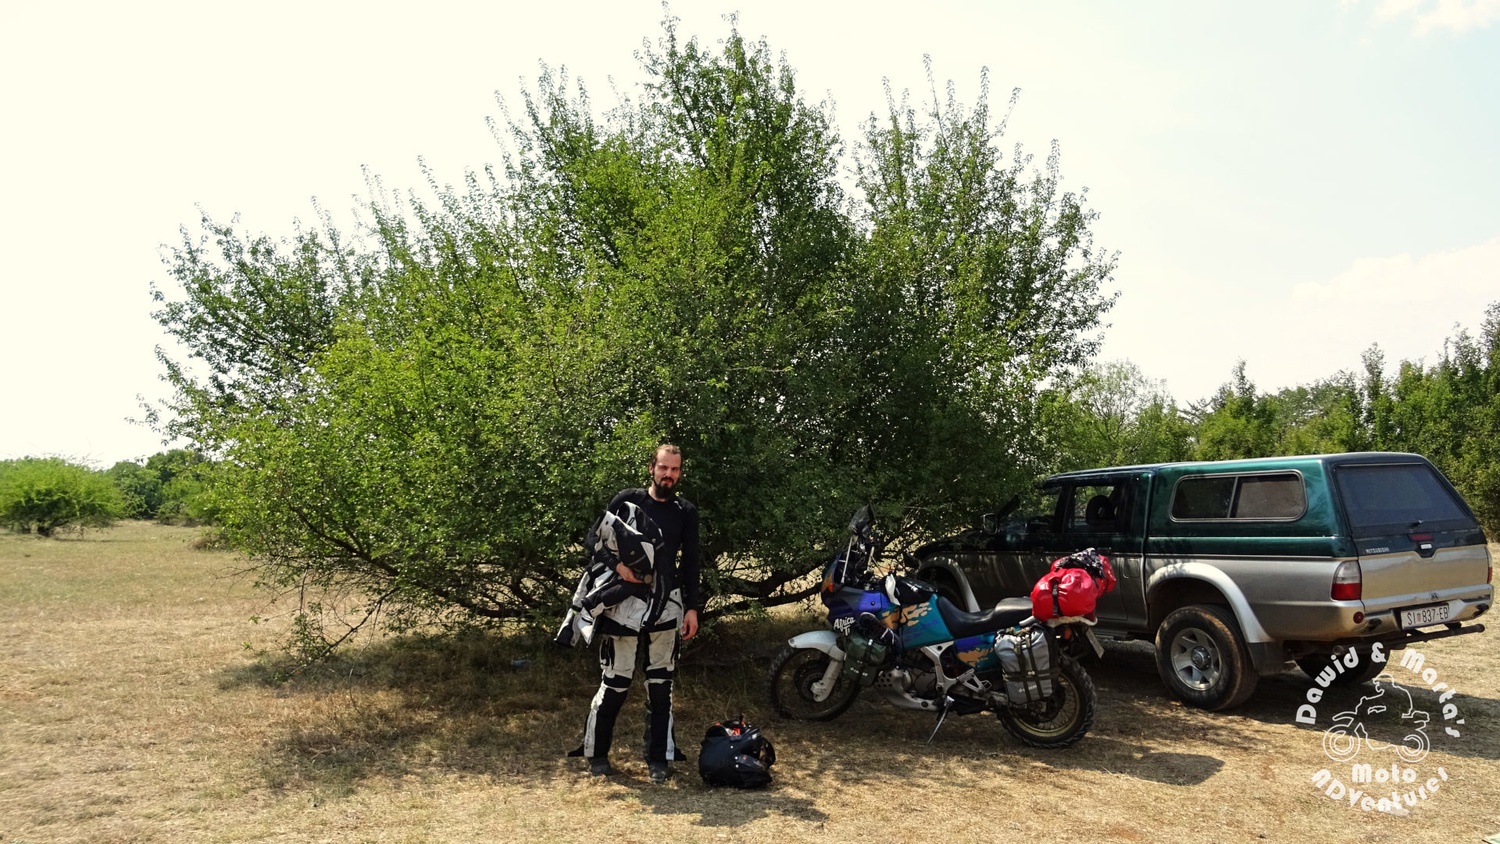 Africa Twin and Dawid at Krk National parking, inland Croatia